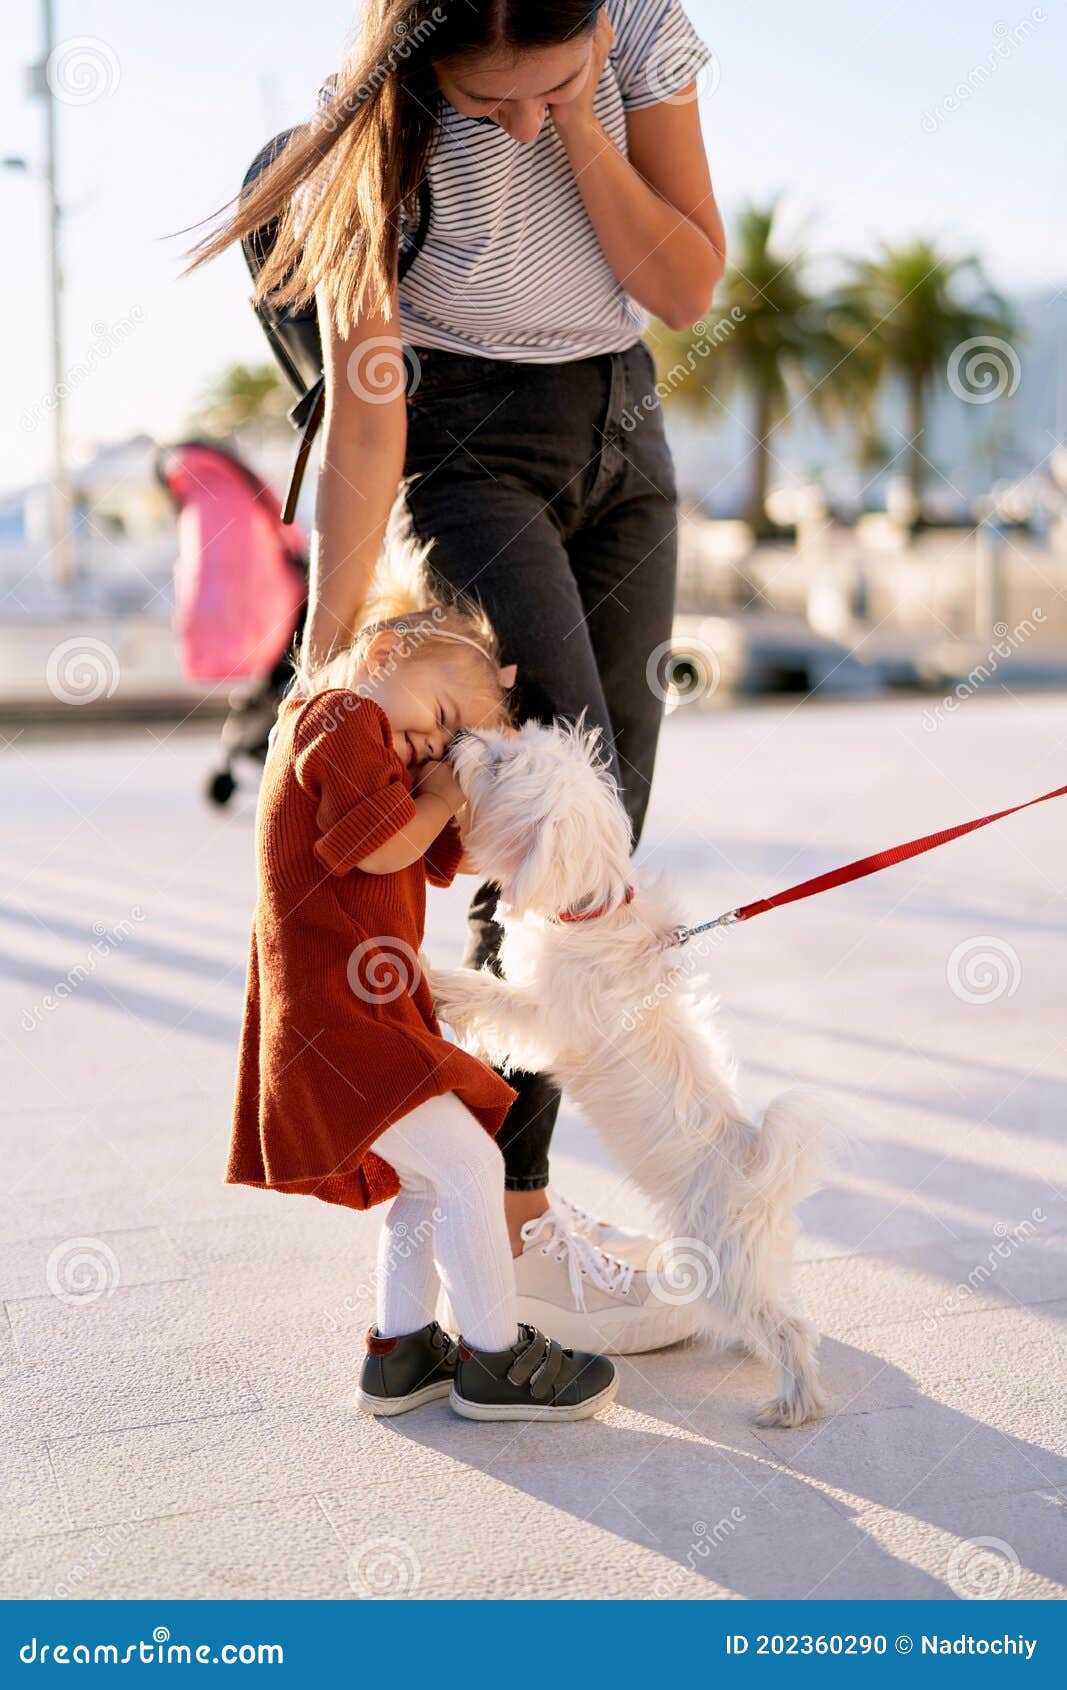 Black mom lick teen 173 Dog Licking Baby Face Photos Free Royalty Free Stock Photos From Dreamstime